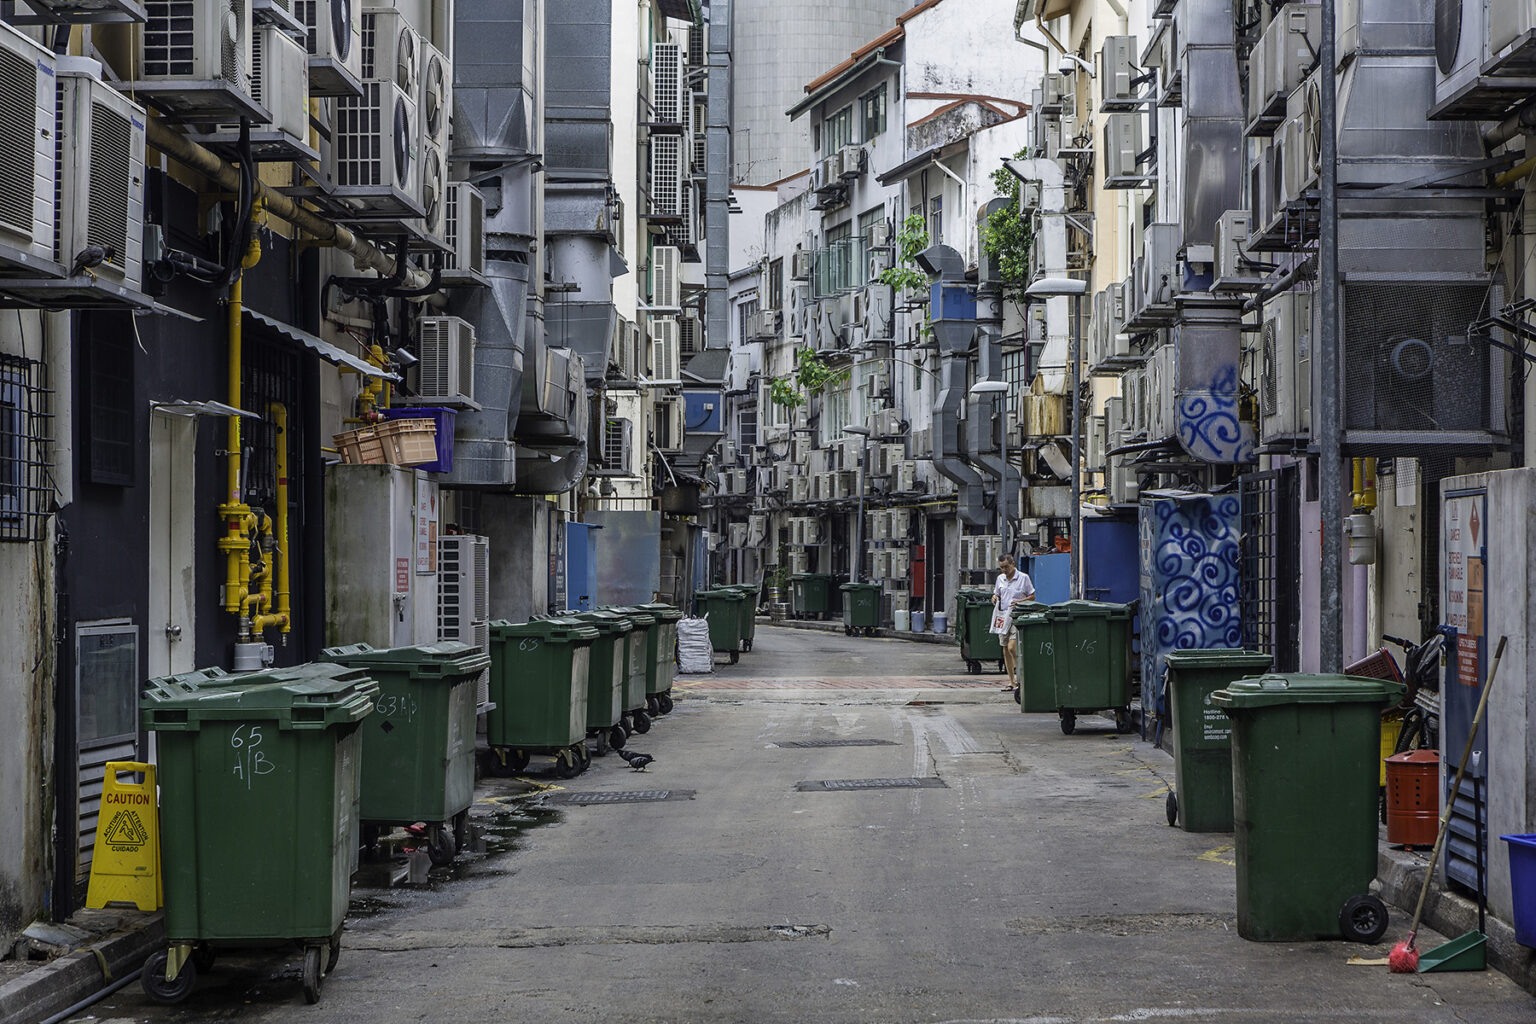 Empty back alley of Circular Road in Boat Quay, Singapore. Loads of green garbage containers are ready for picking up.